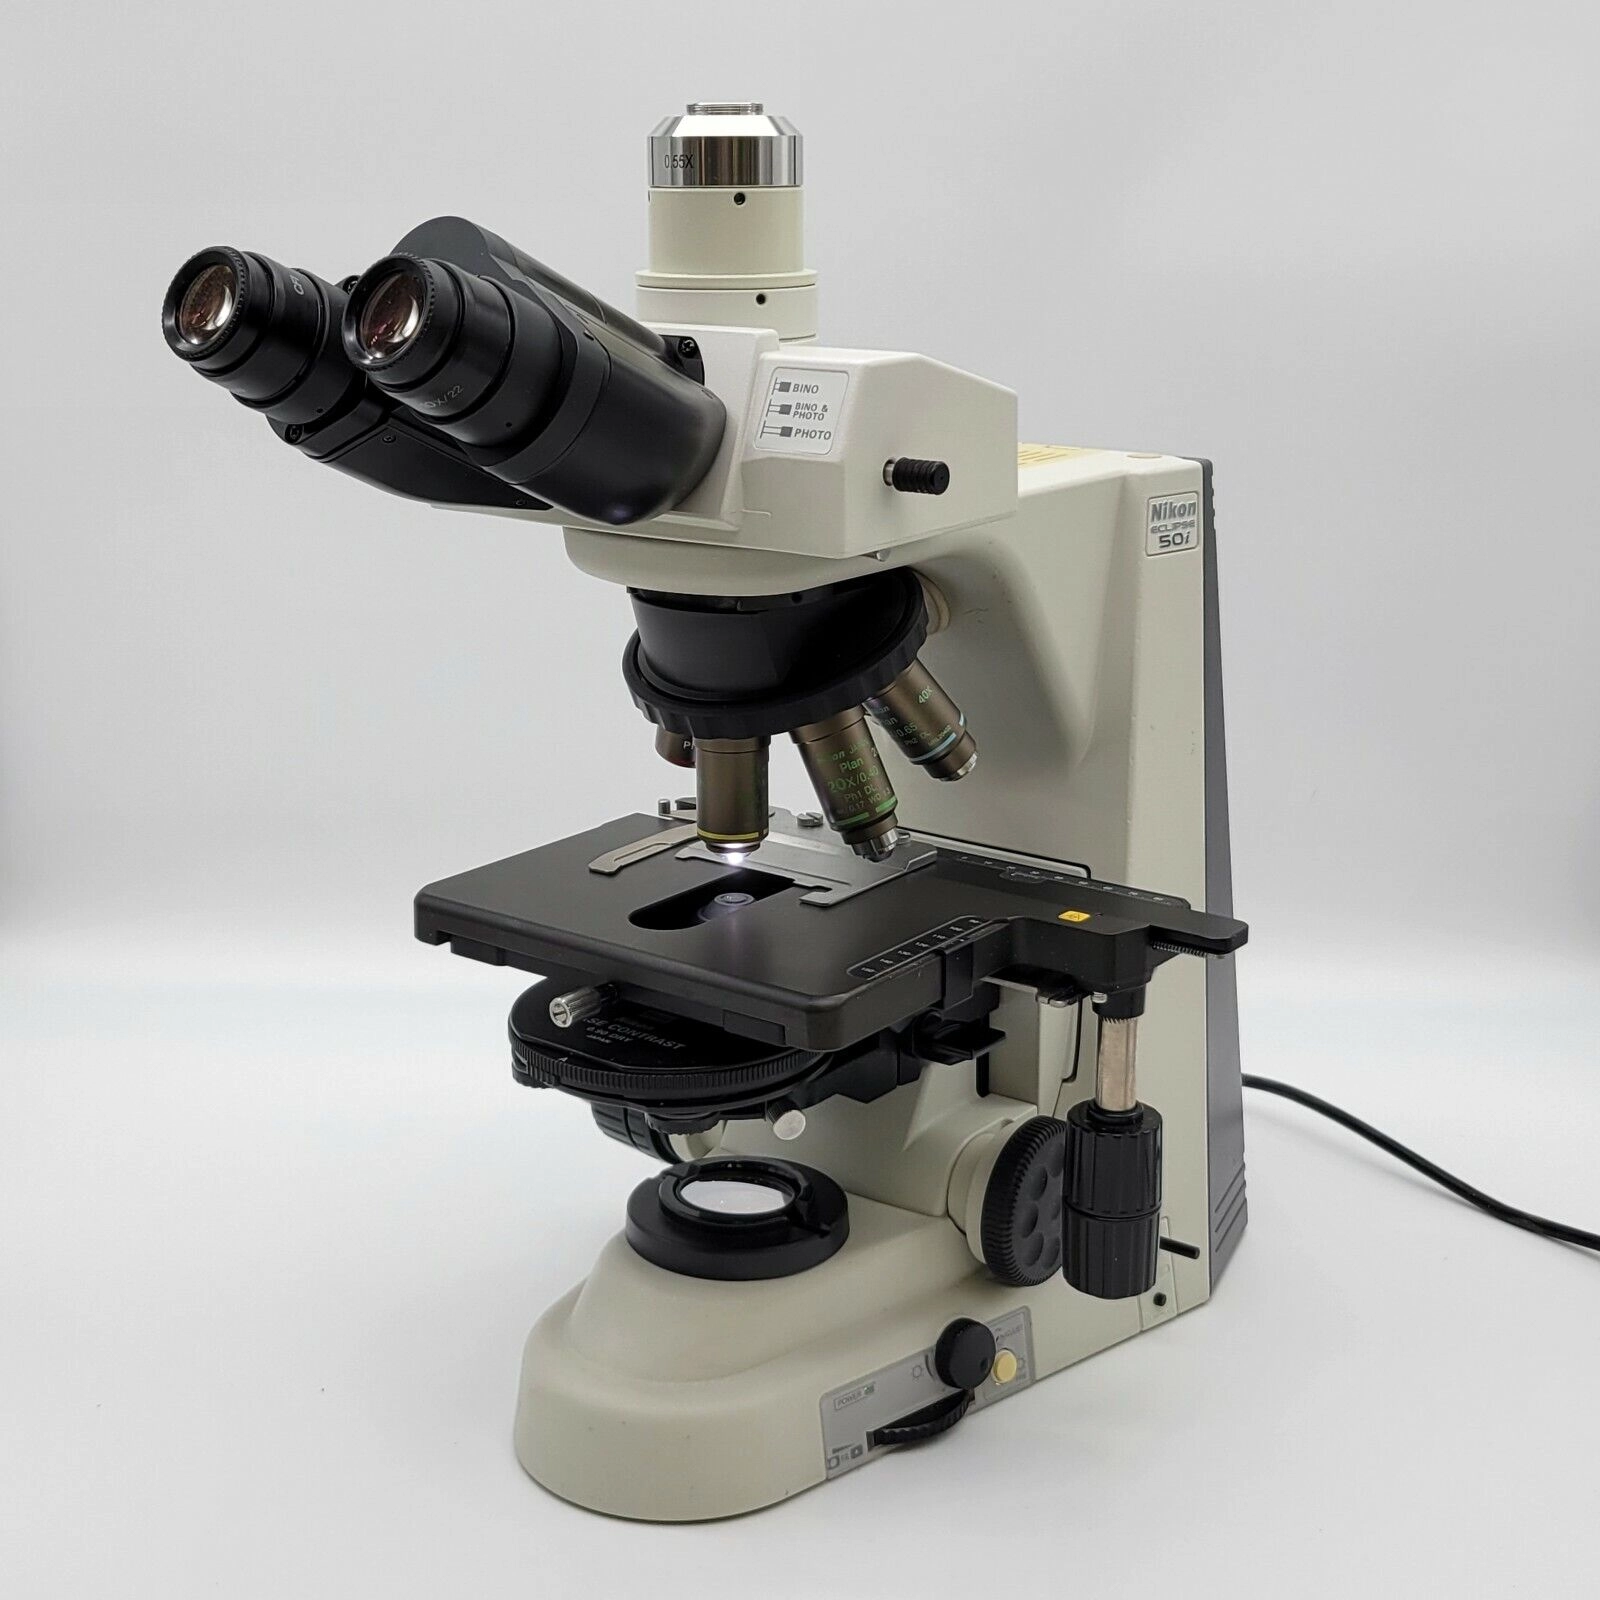 Nikon Microscope Eclipse 50i with Phase Contrast and Trinocular Head